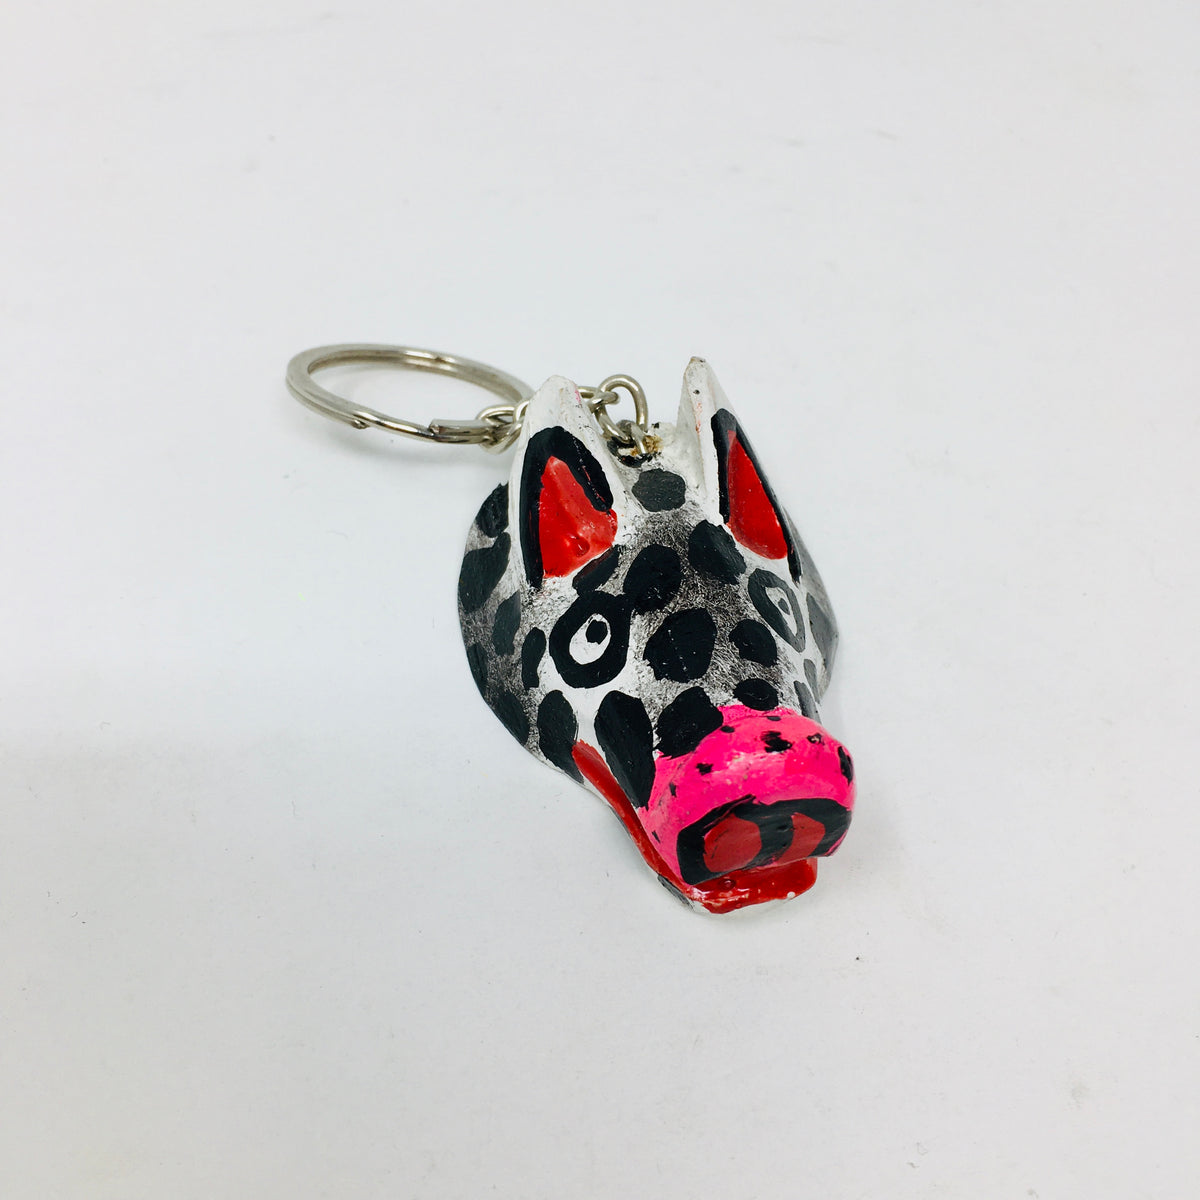 Wood Carved and Painted Mask Key Chains (ALL)